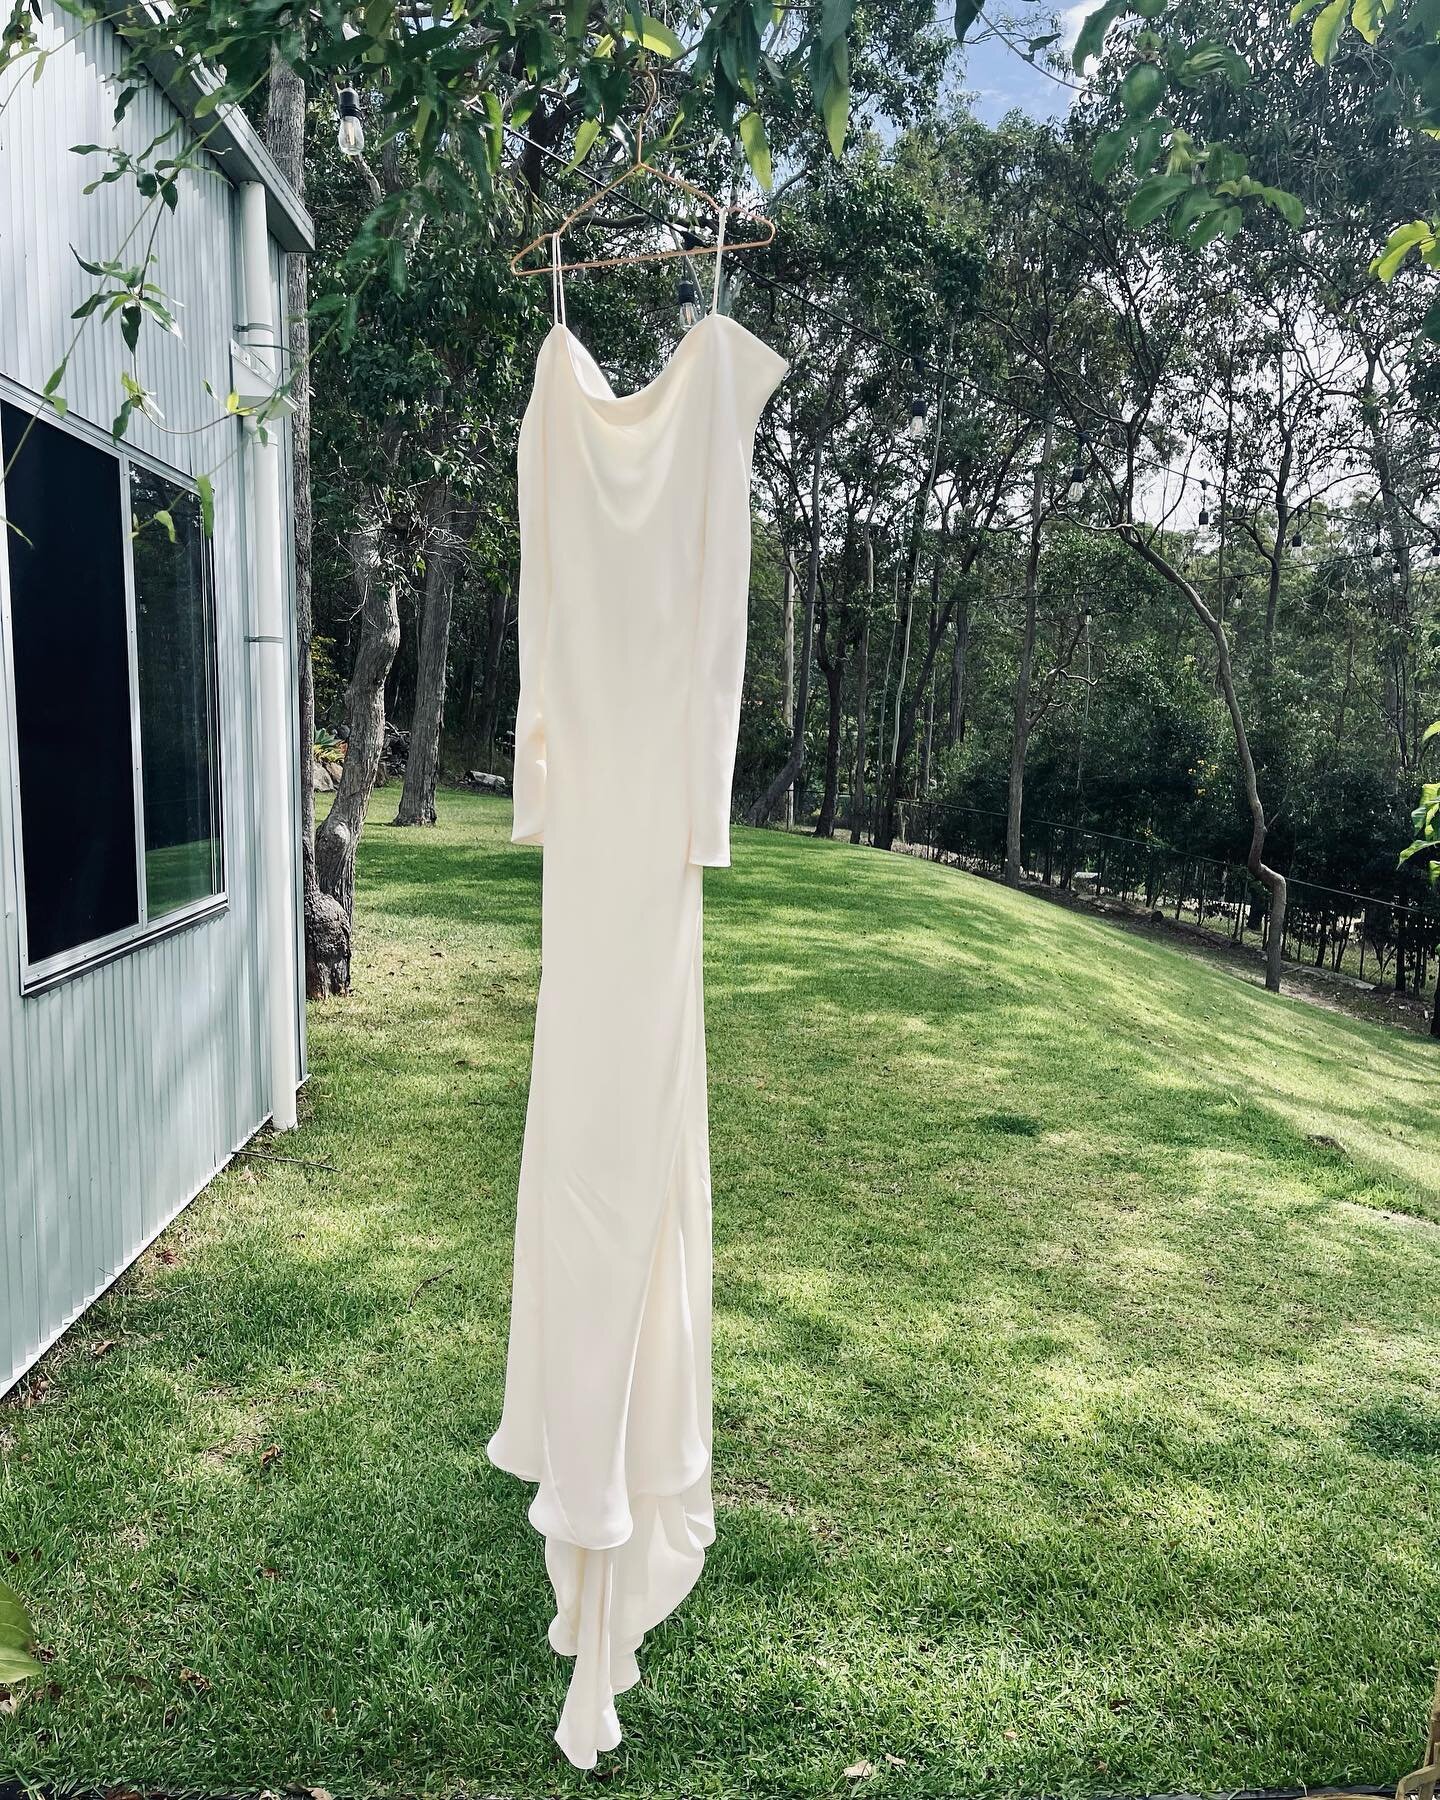 Our dream gown. This bias cut beauty was created for the elegant and down to earth bride @staceymegeee 🐚 

One of a kind, made from an ivory silk faile in our hinterland studio @flauralabel